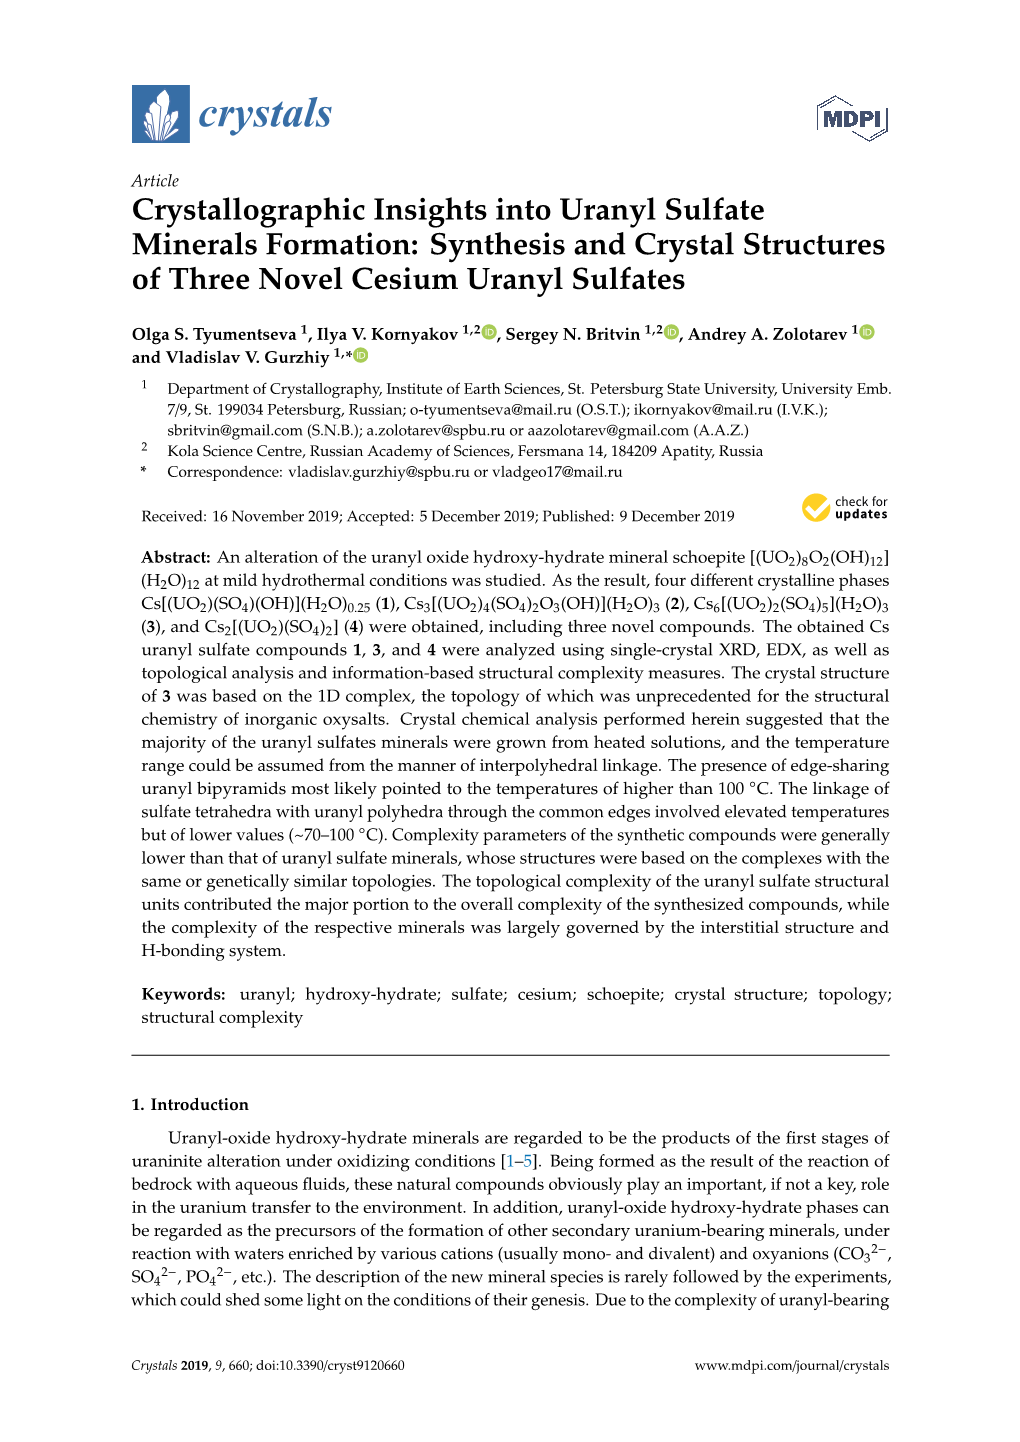 Crystallographic Insights Into Uranyl Sulfate Minerals Formation: Synthesis and Crystal Structures of Three Novel Cesium Uranyl Sulfates